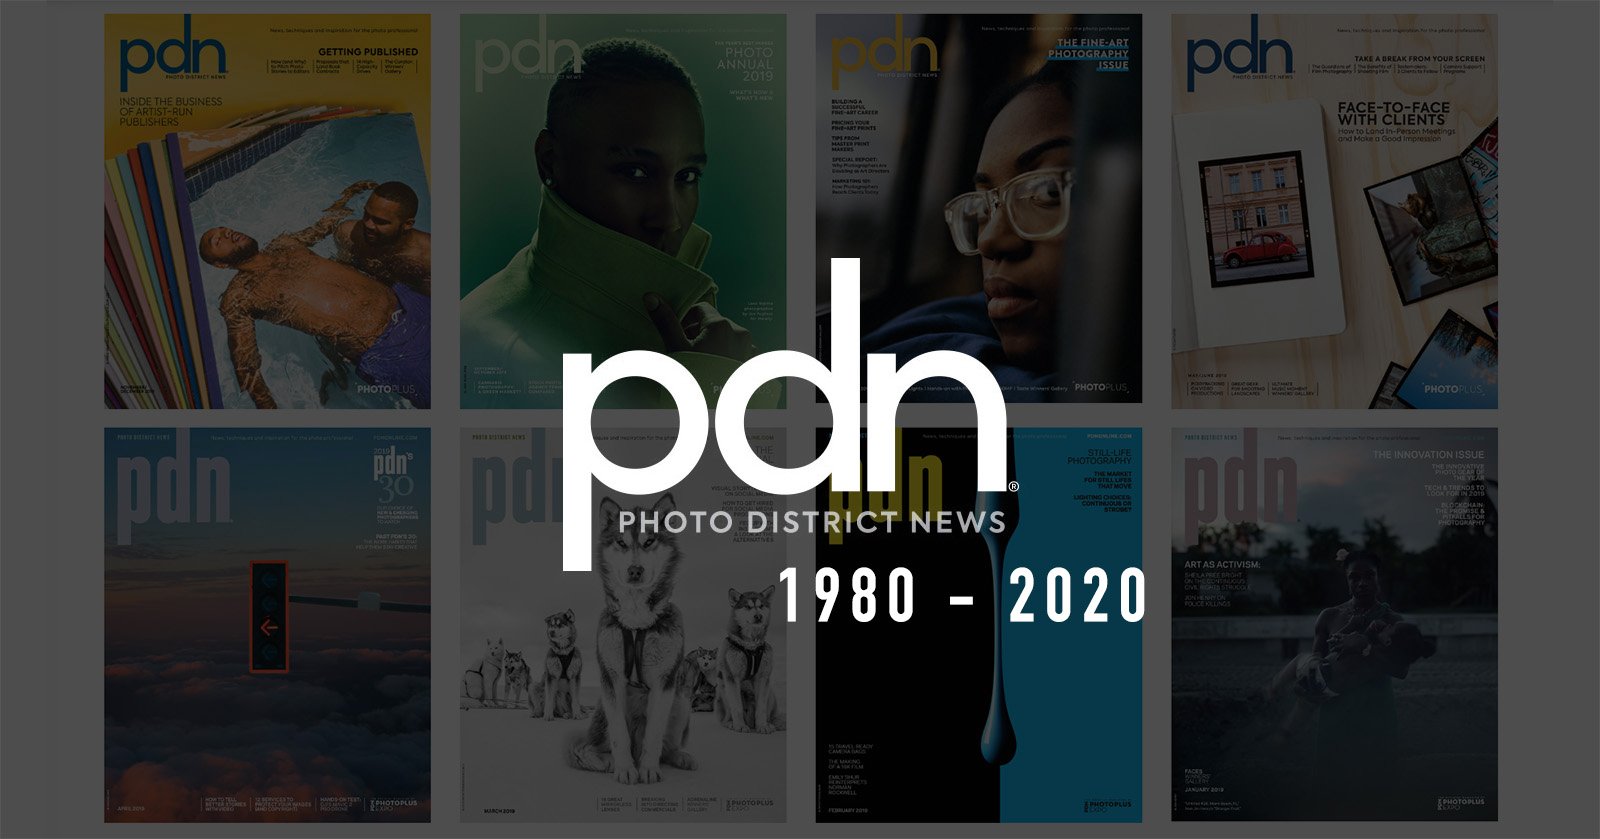 The End of an Era: Photo District News (PDN) is Shutting Down